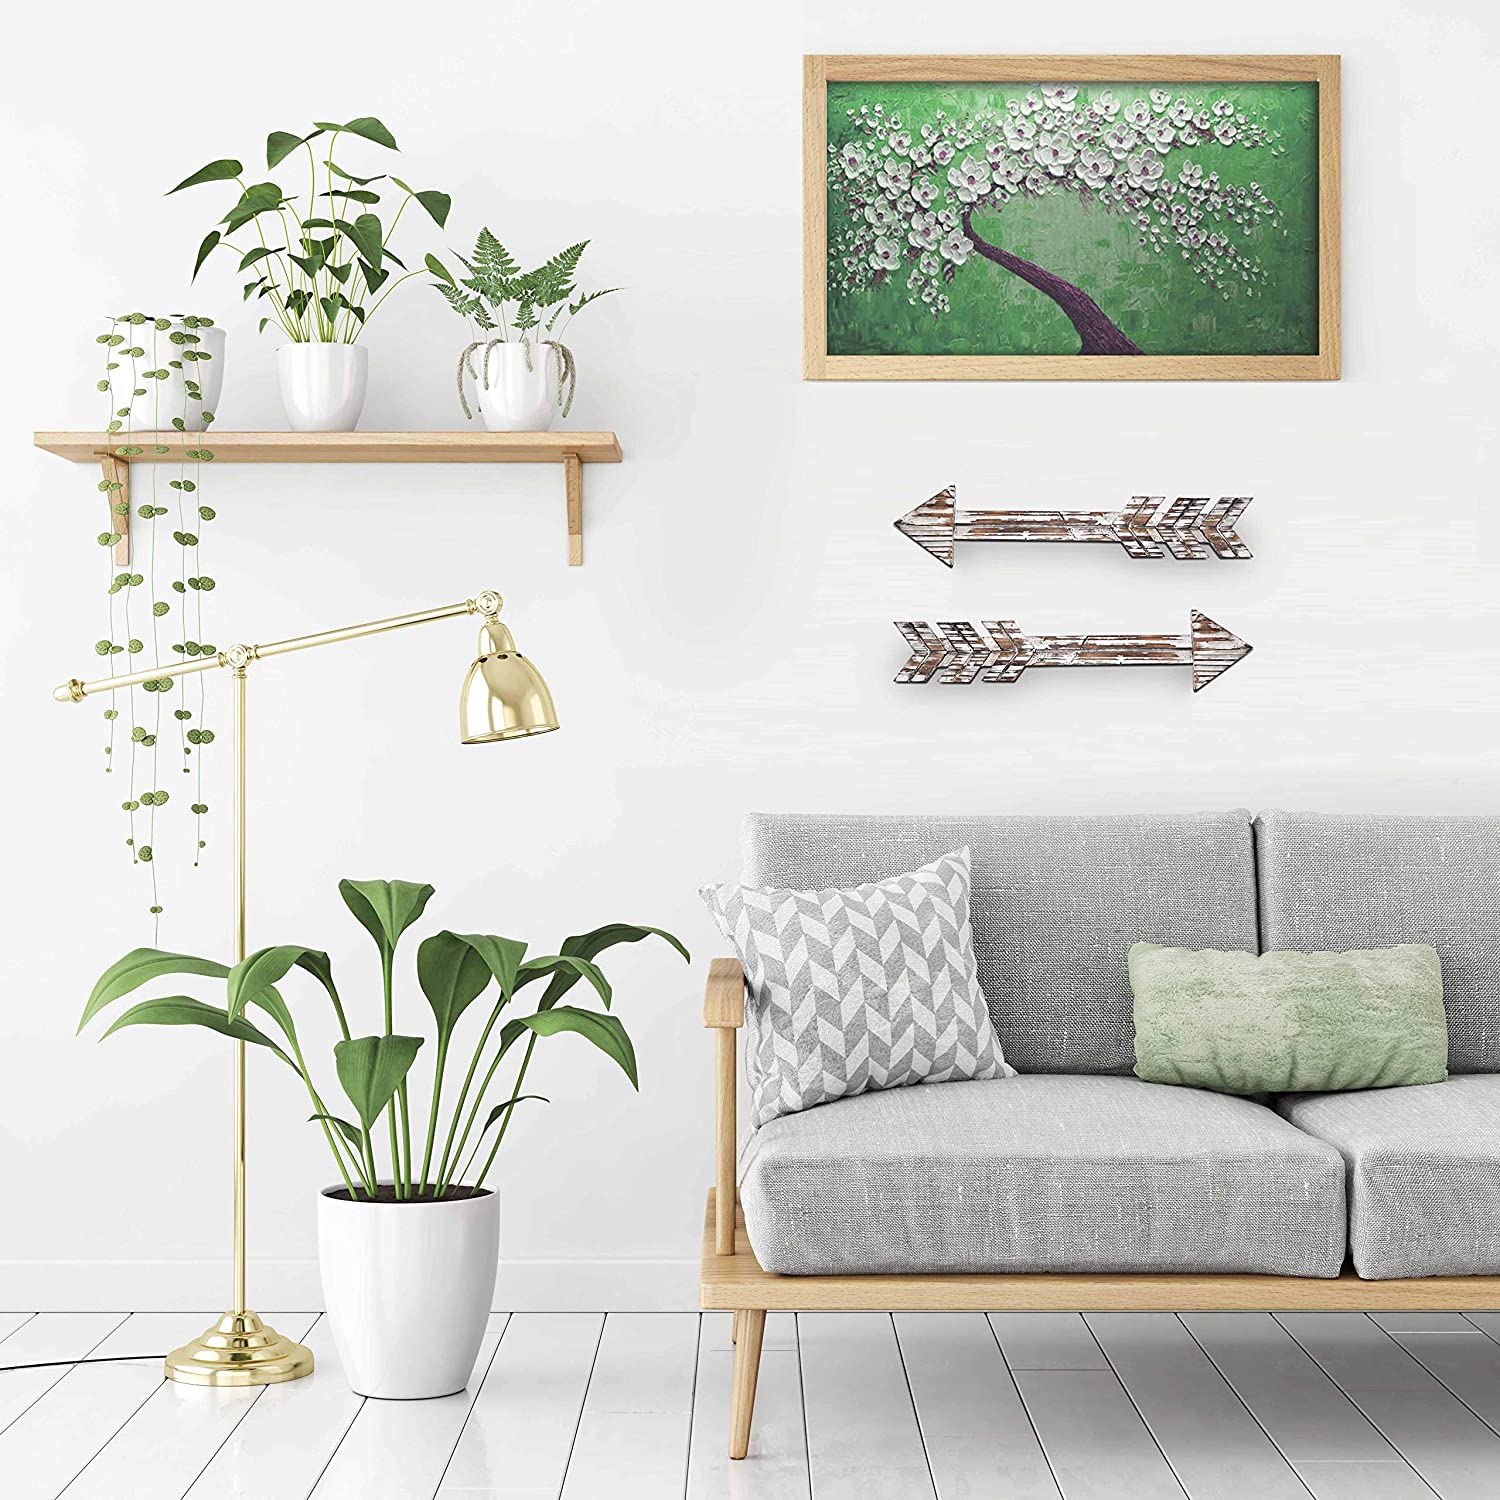 Wooden Arrows decoration - household items - by owner - housewares